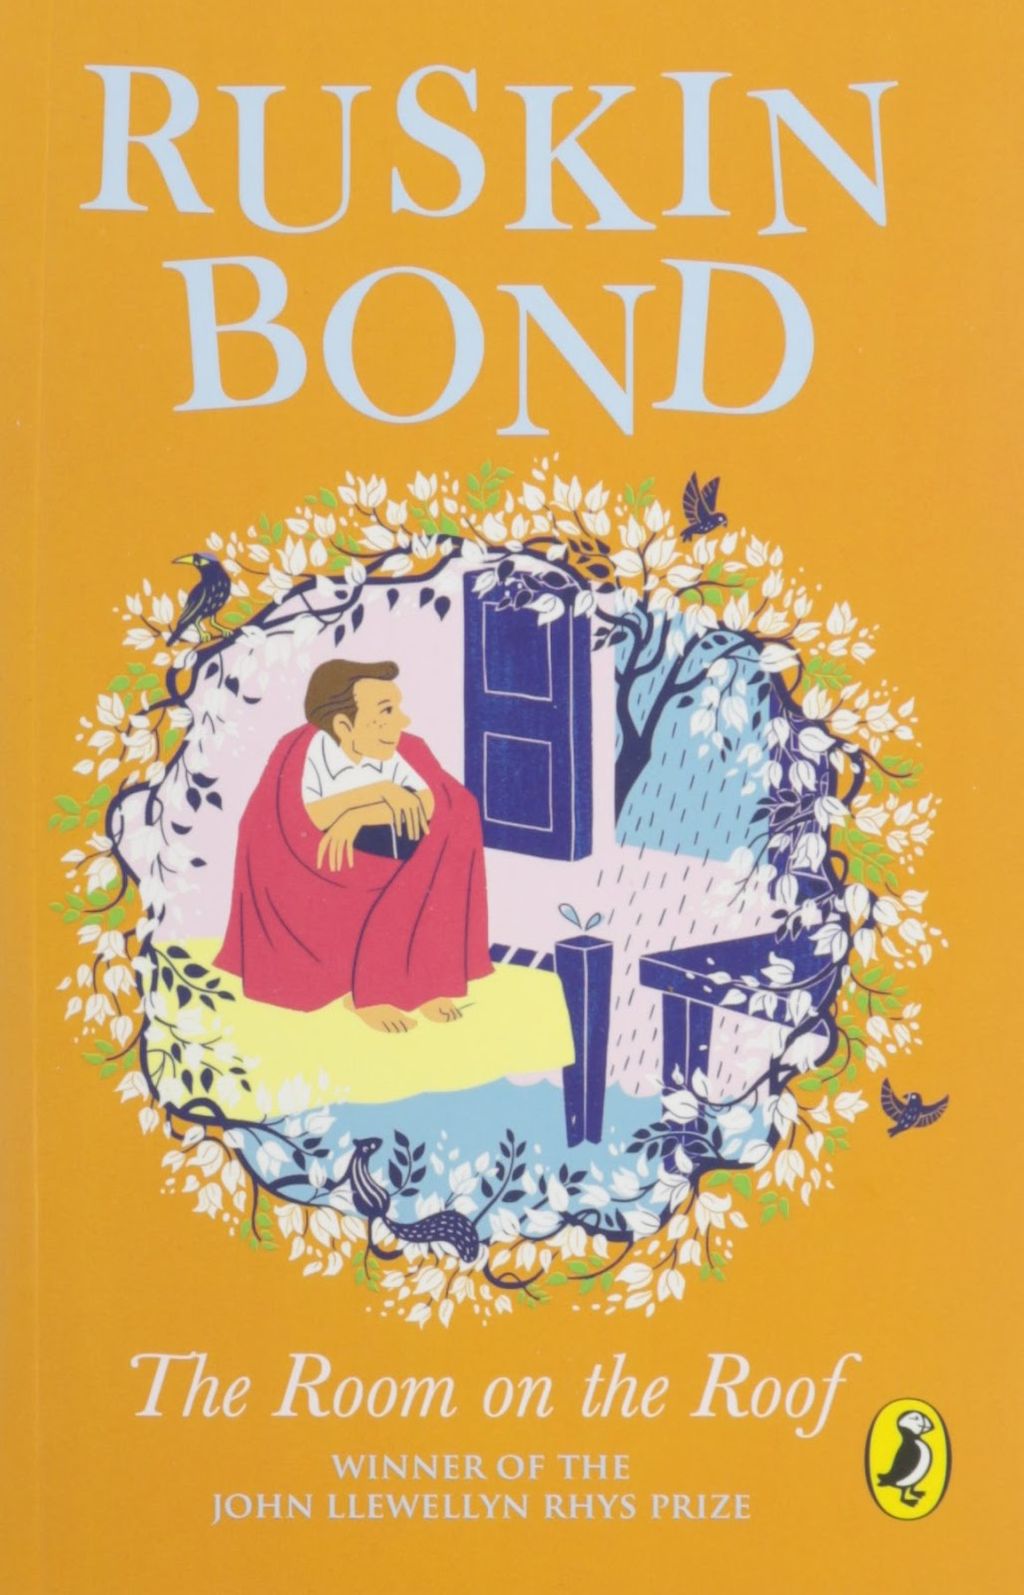 List of Interesting Characters from Ruskin Bond Stories